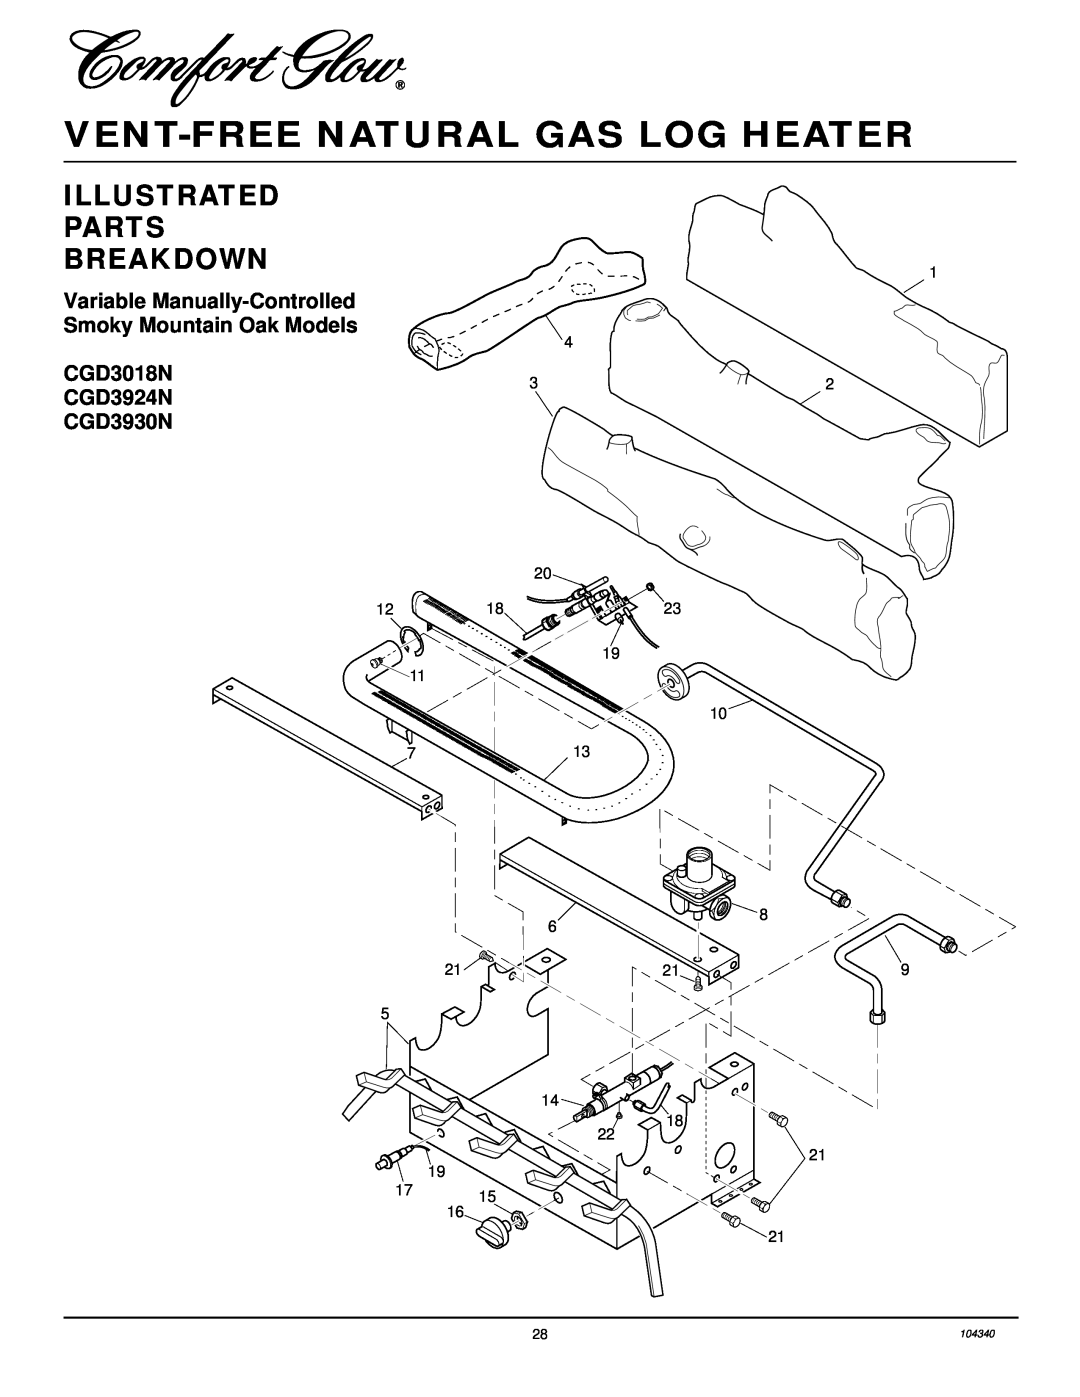 Desa CCL3924NT Illustrated Parts Breakdown, Variable Manually-Controlled, Smoky Mountain Oak Models CGD3018N CGD3924N 